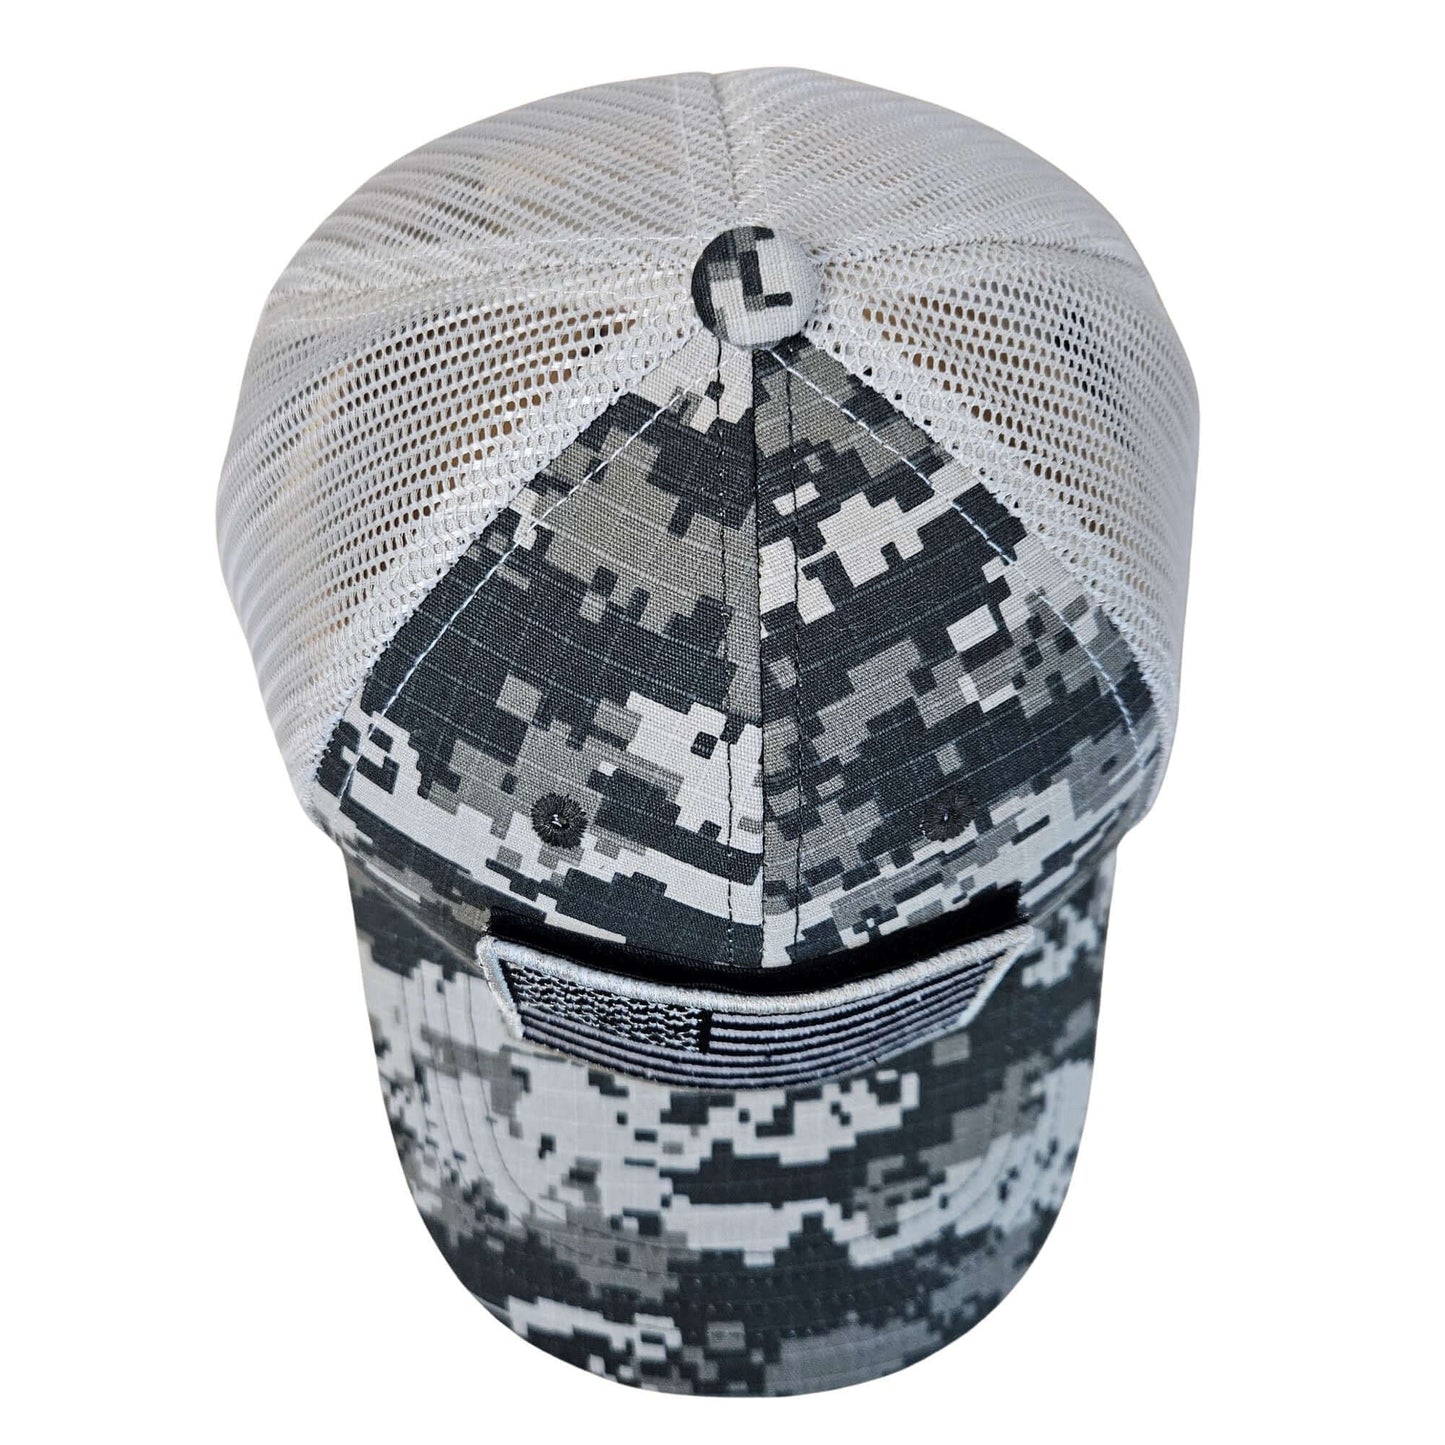 GAC Stop Embroidered US Flag Velcro Patch Baseball Hat Camo Cap